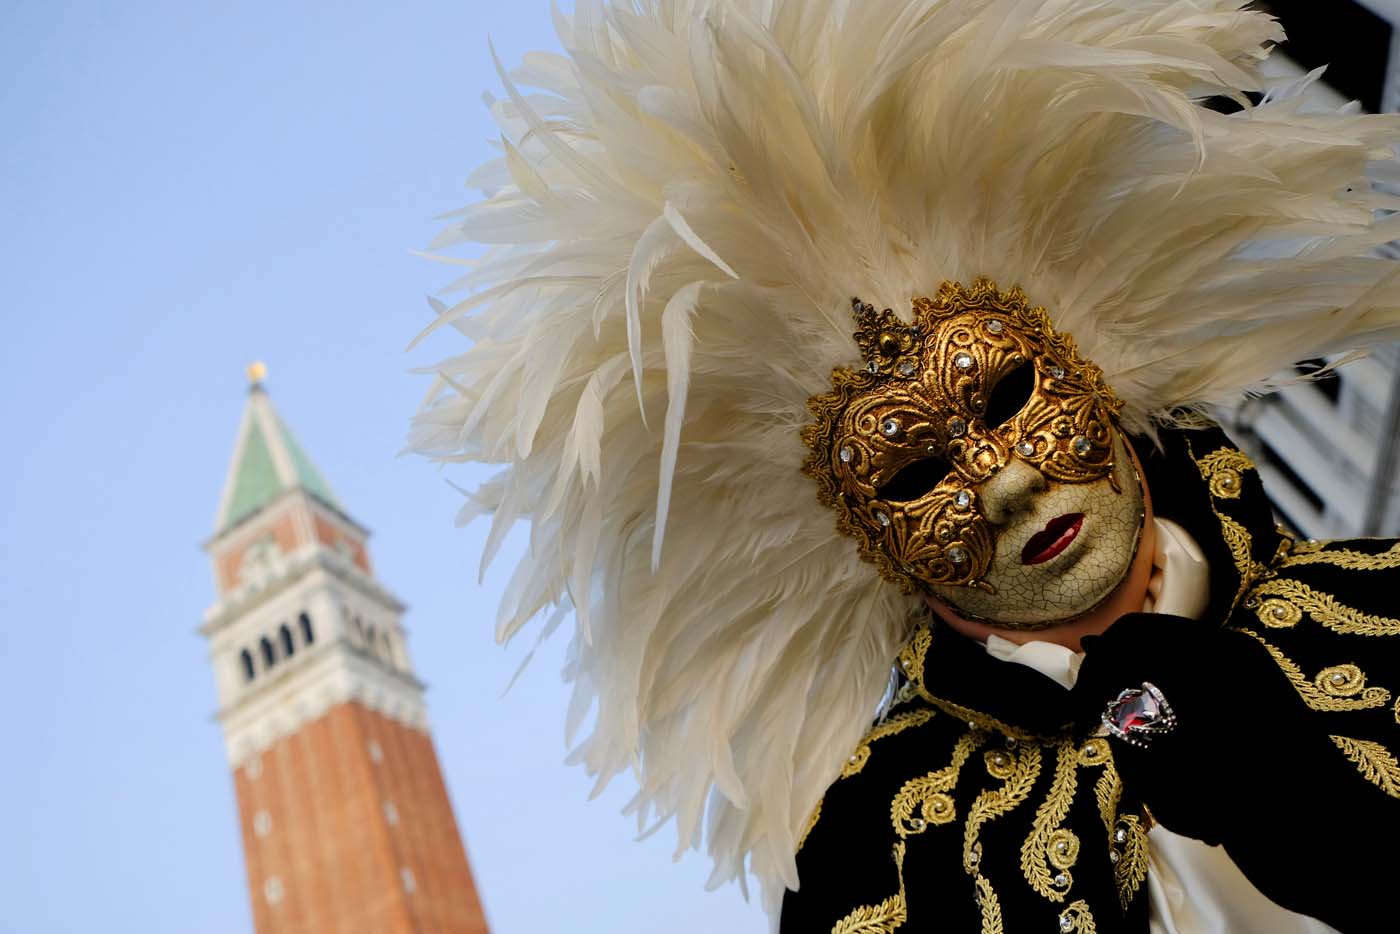 A masked reveller poses during the Carnival in Venice, Italy January 28, 2018. REUTERS/Manuel Silvestri